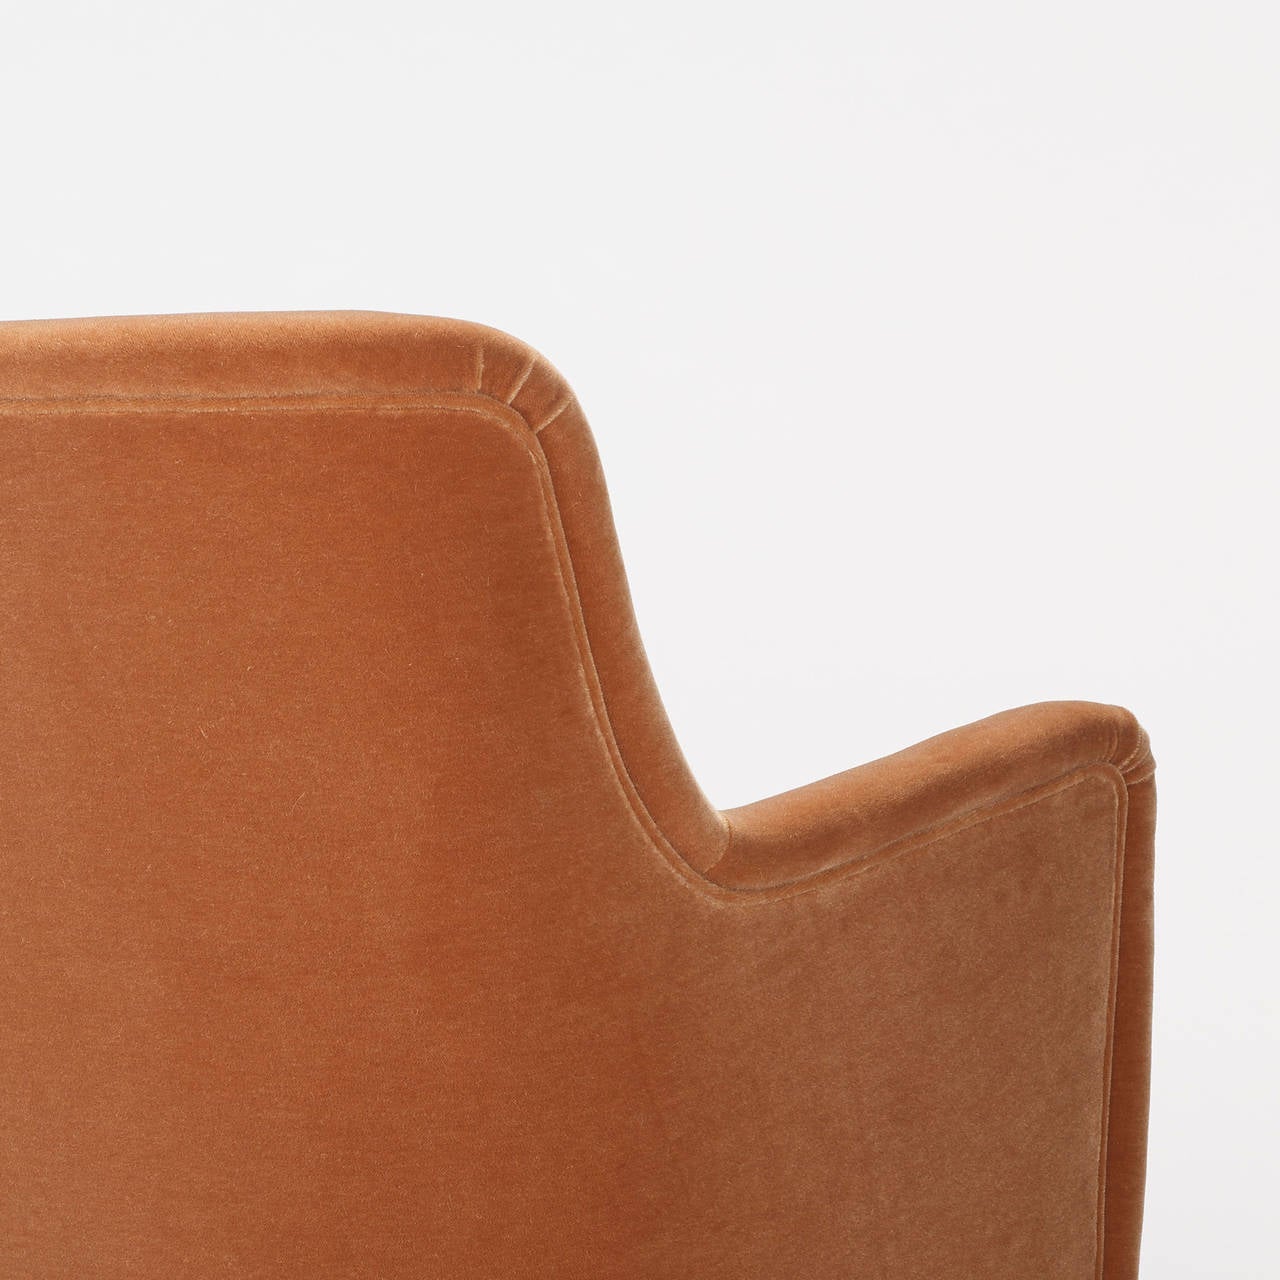 Danish Lounge Chairs Pair by Birte Iversen for A.J. Iversen